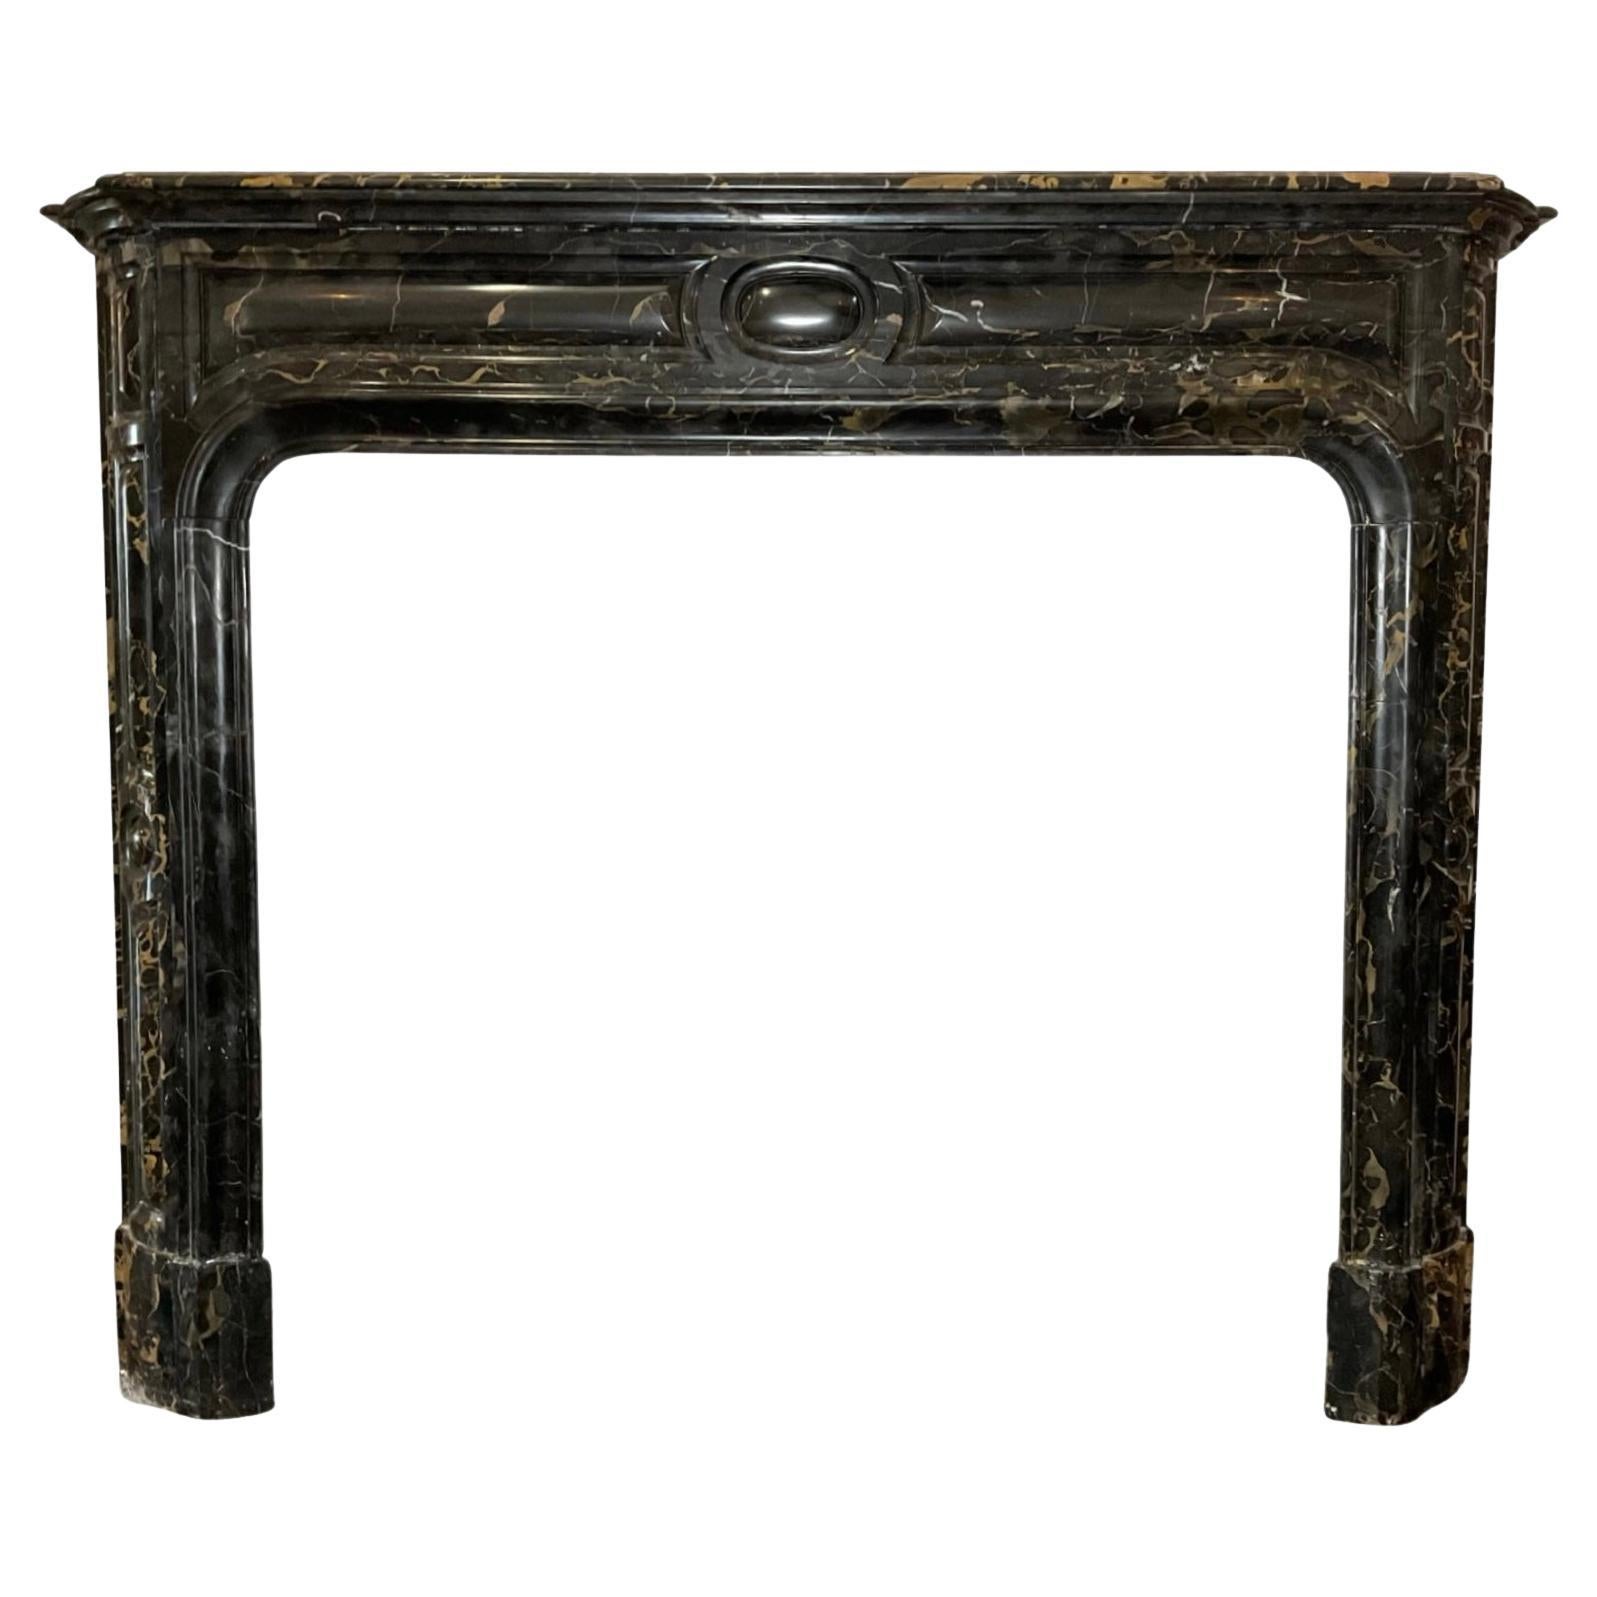 This exquisite French Porto Nero Marble Mantel was crafted in the 1870s and is sure to add a touch of elegance to any room. Its black porto nero marble is of the highest quality, this mantel is sure to last for generations. Enjoy the beauty,